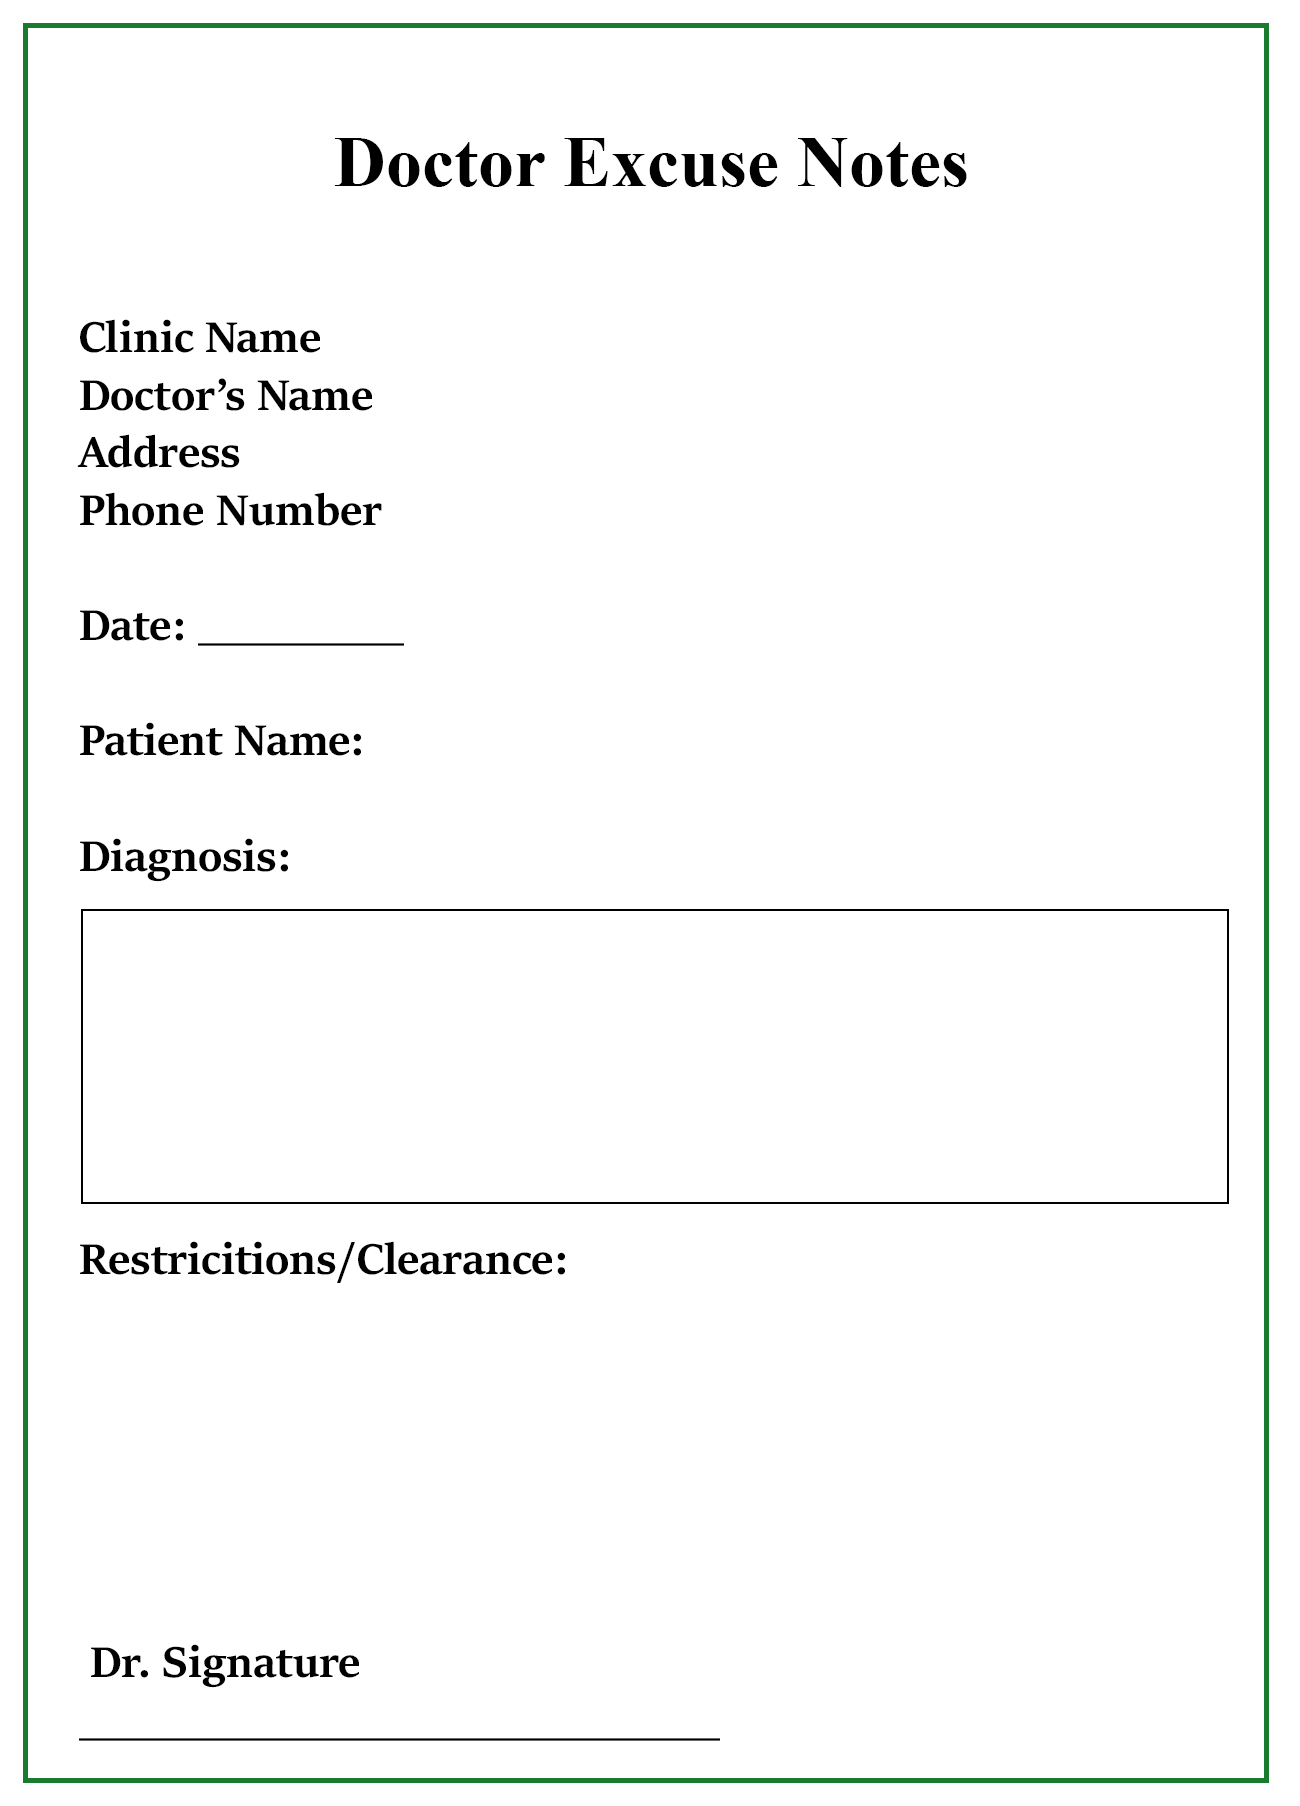 028 Fake Doctors Note Template Pdf Ideas Doctor Excuse For Fake Doctors Note Template Pdf Free